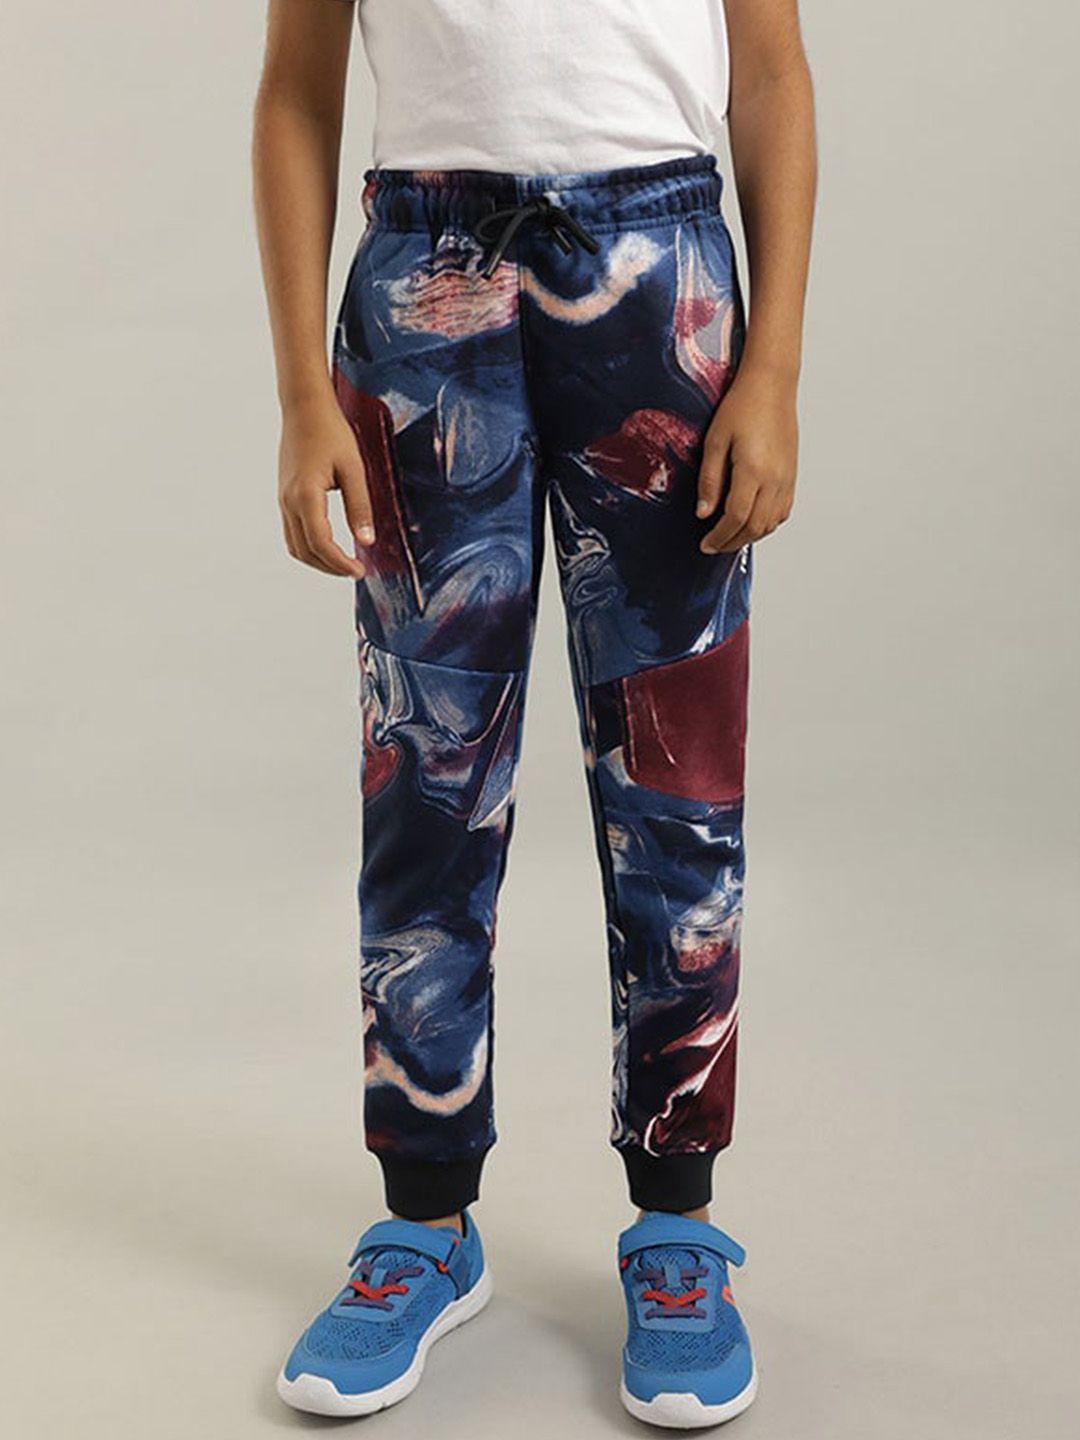 indian terrain boys mid-rise printed cotton joggers track pants